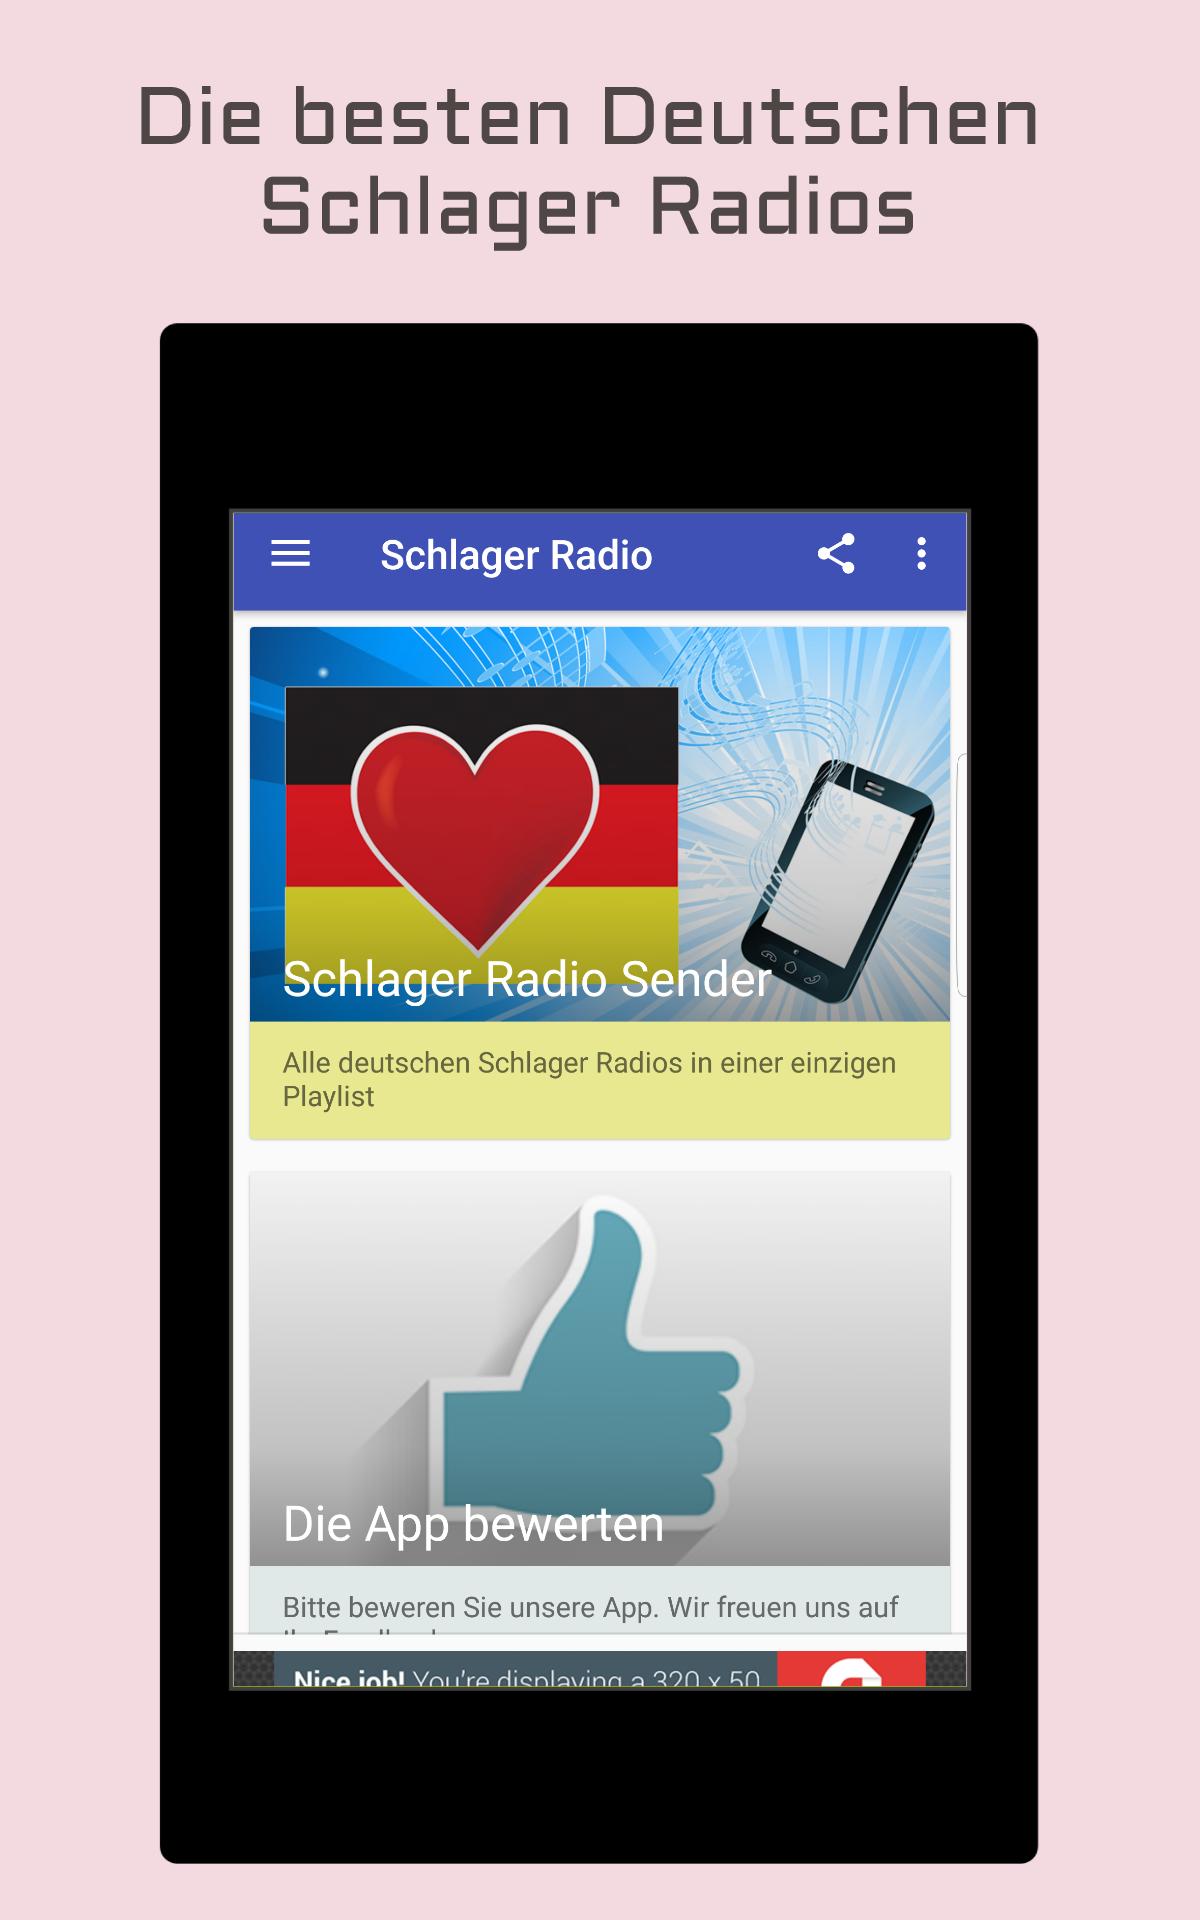 Schlager Radio for Android - APK Download